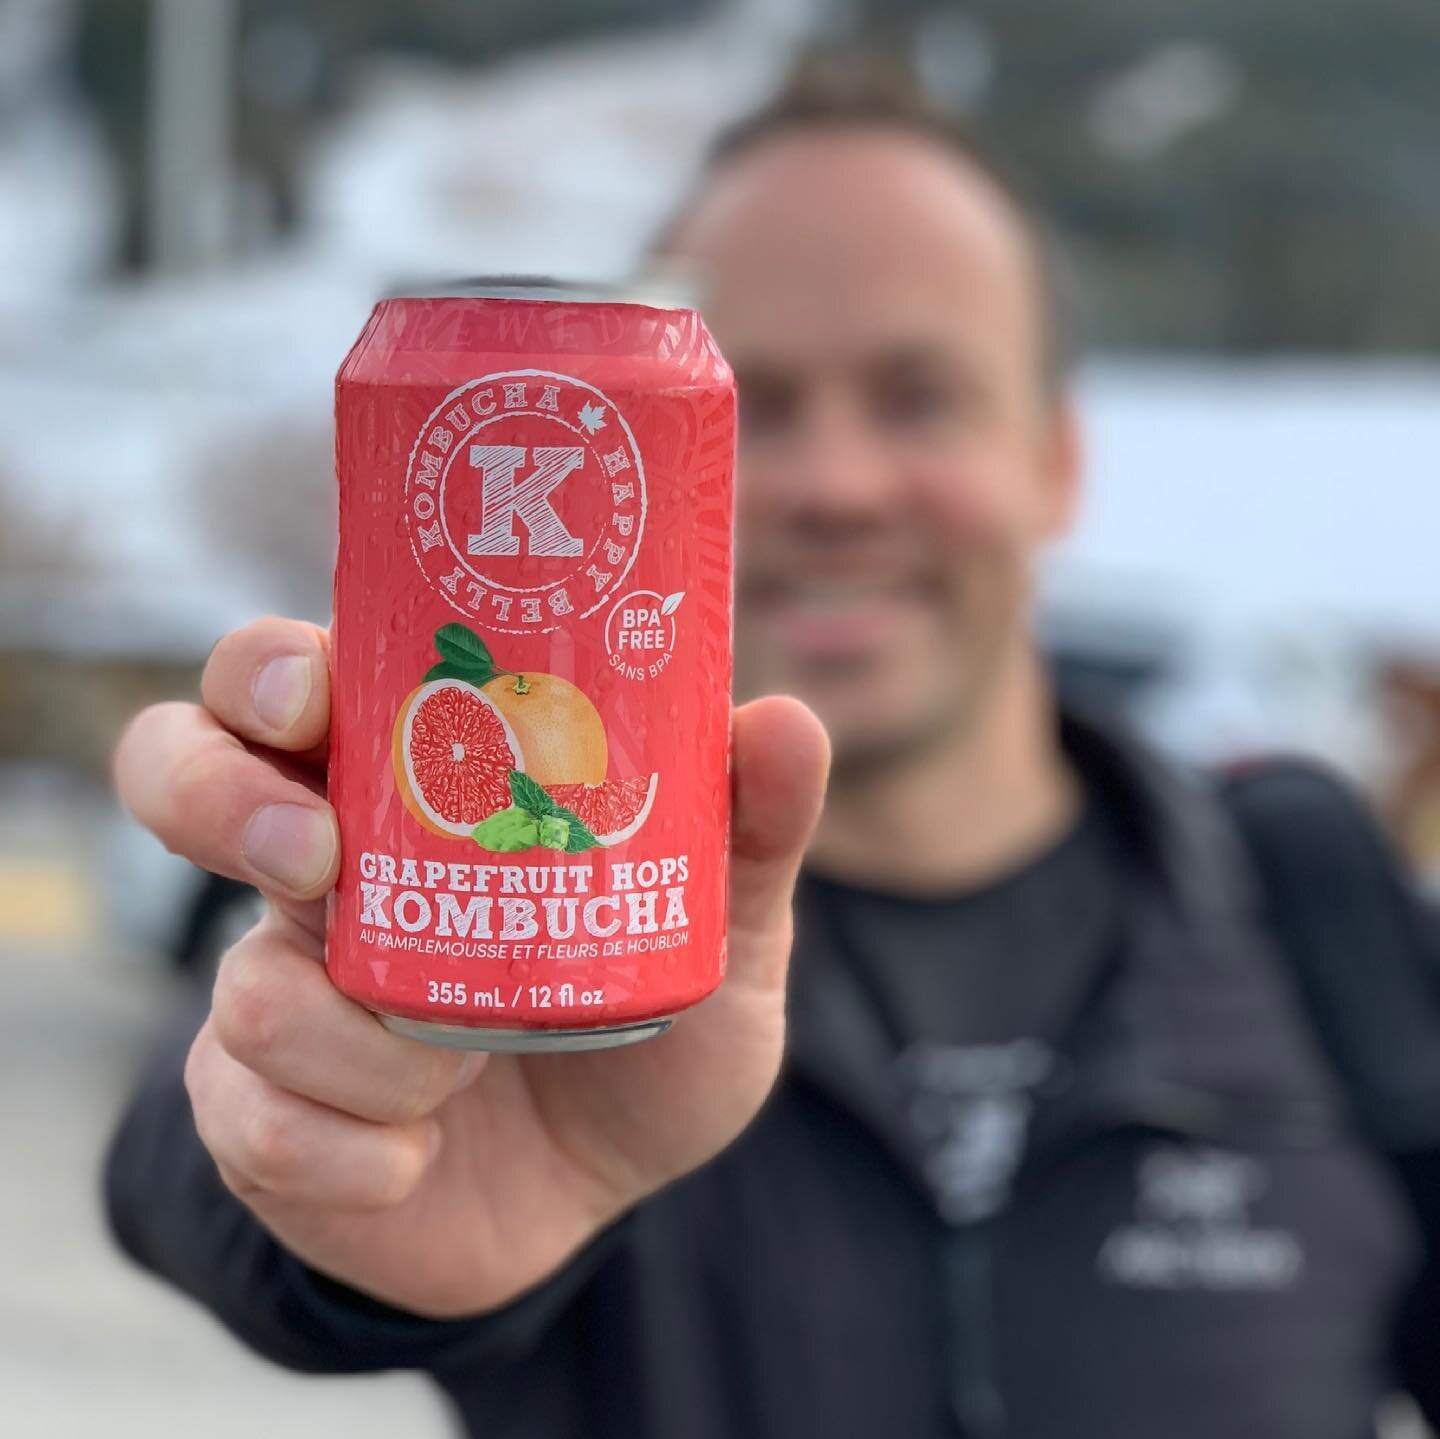 Head down to our Granary Road Farmers Market location this weekend to enjoy our full lineup of Kombucha in cans plus Growler/Howler fills of 6 flavours on tap!

This weekend our taps are pouring:
🍹 Mint
🍹 Haskap Berry
🍹 Strawberry Hibiscus Ginger
